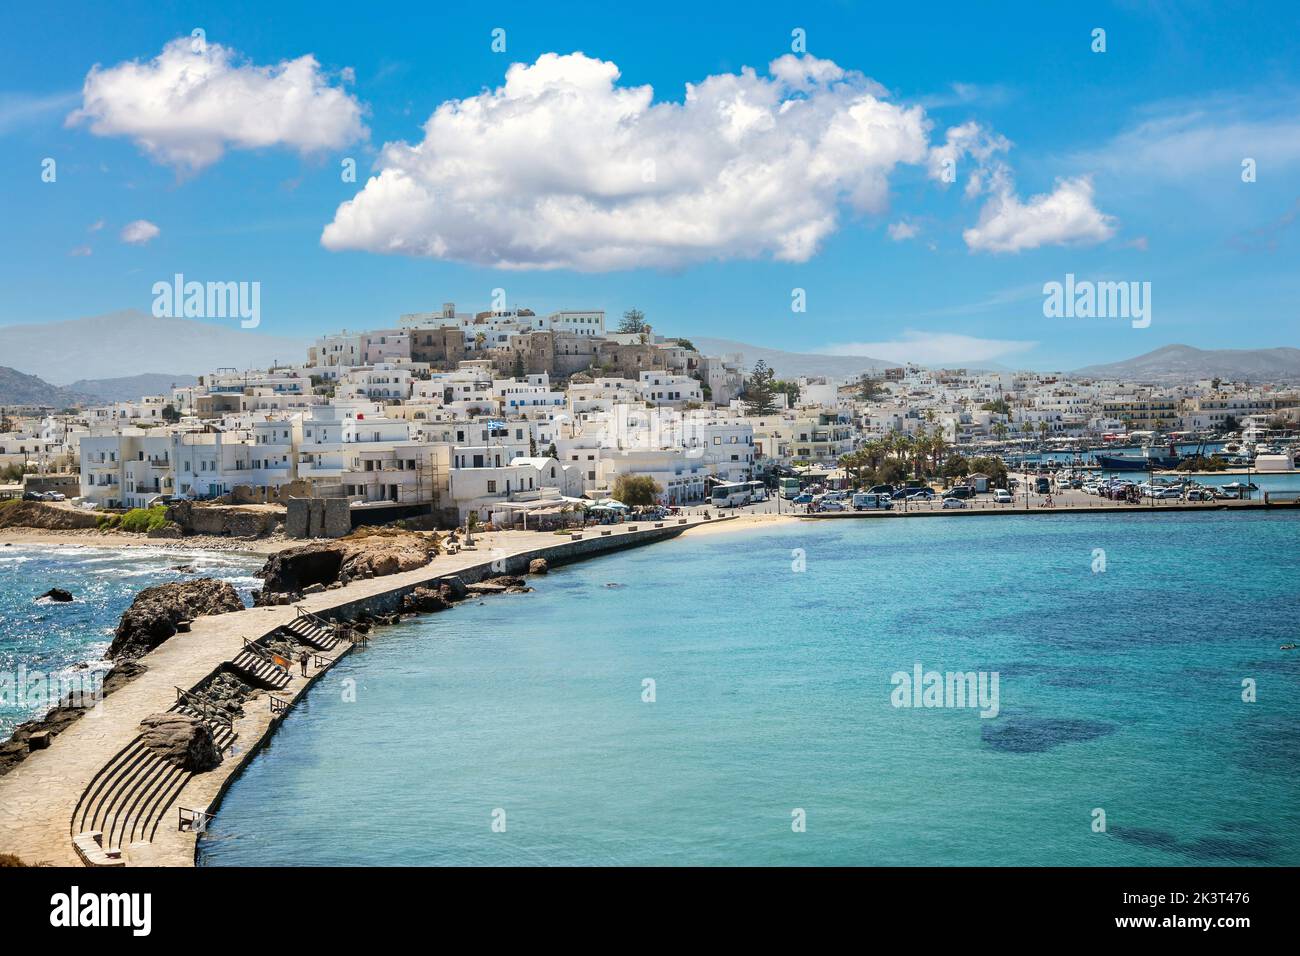 Greece, reaching Naxos harbor, Cyclades islands. View from ship of traditional whitewashed houses on the hill. Calm sea, blue sky. Summer destination. Stock Photo